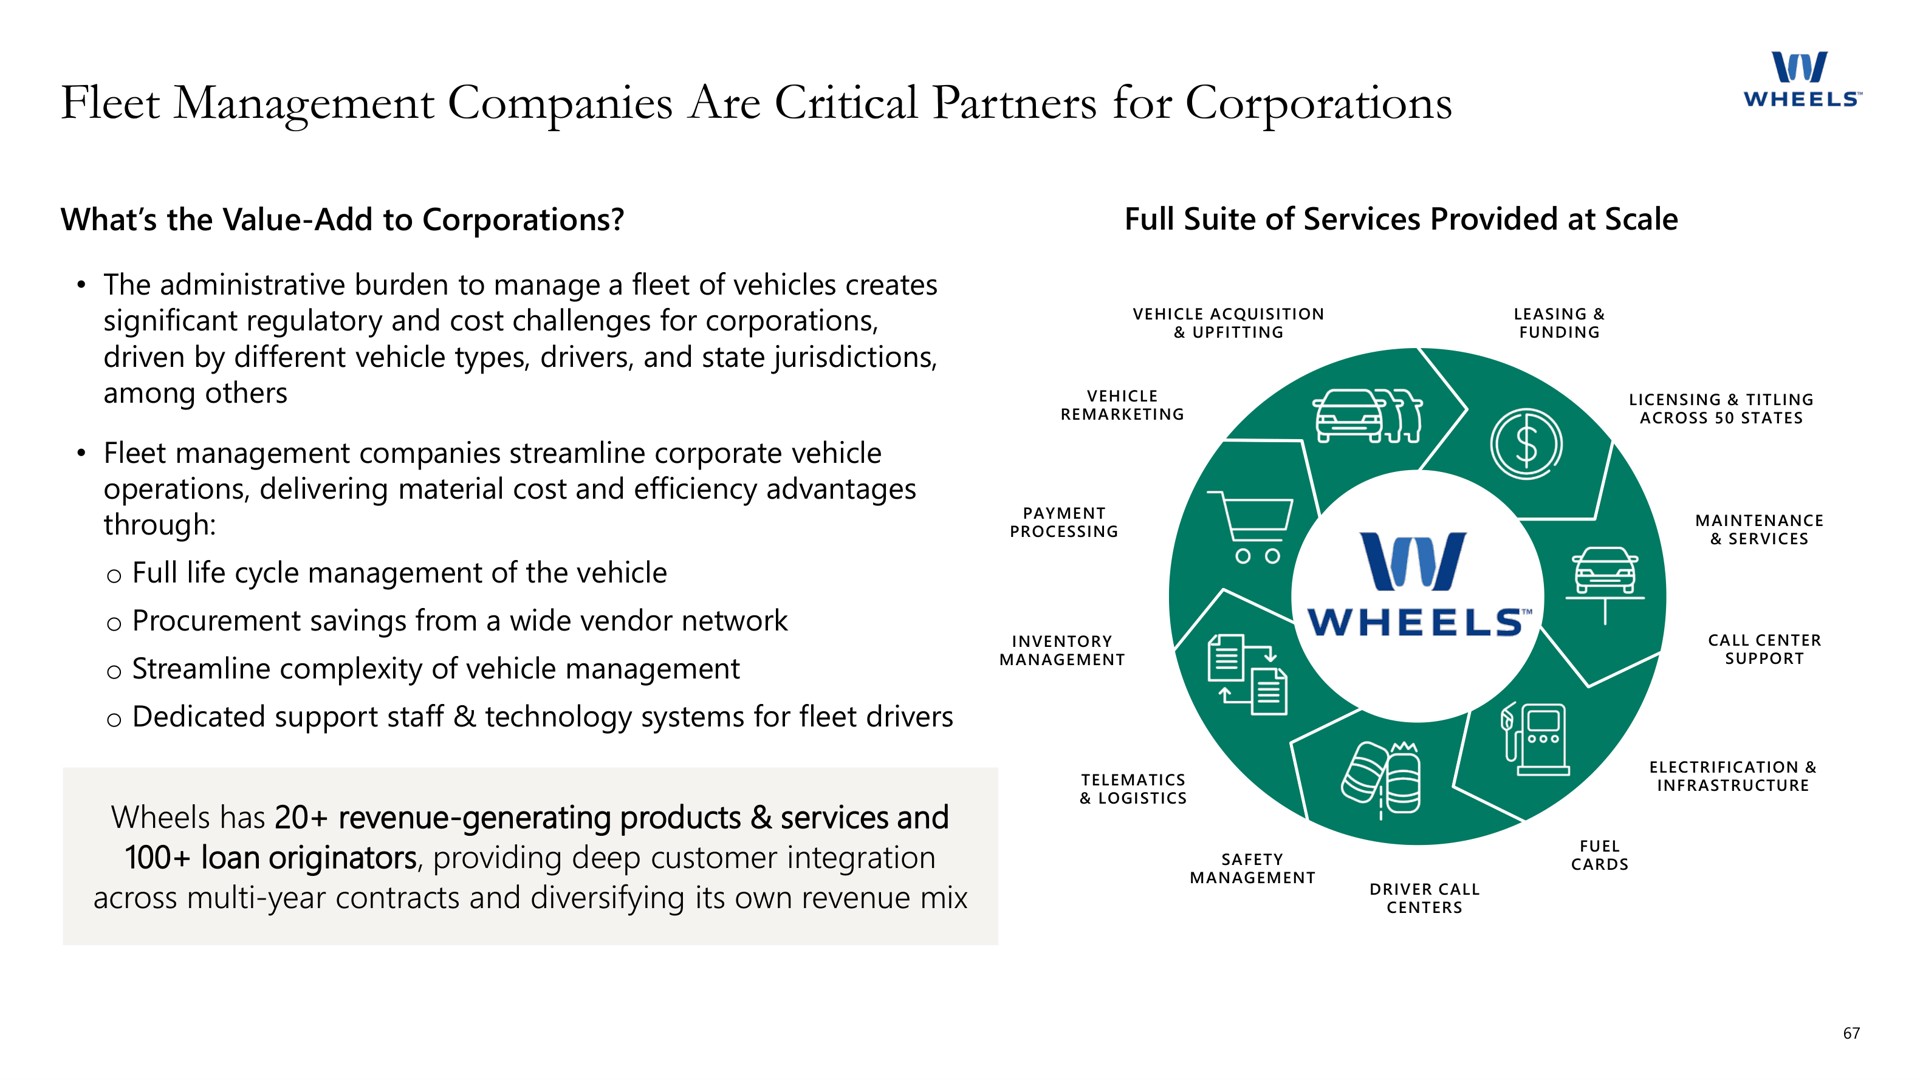 fleet management companies are critical partners for corporations vie i | Apollo Global Management